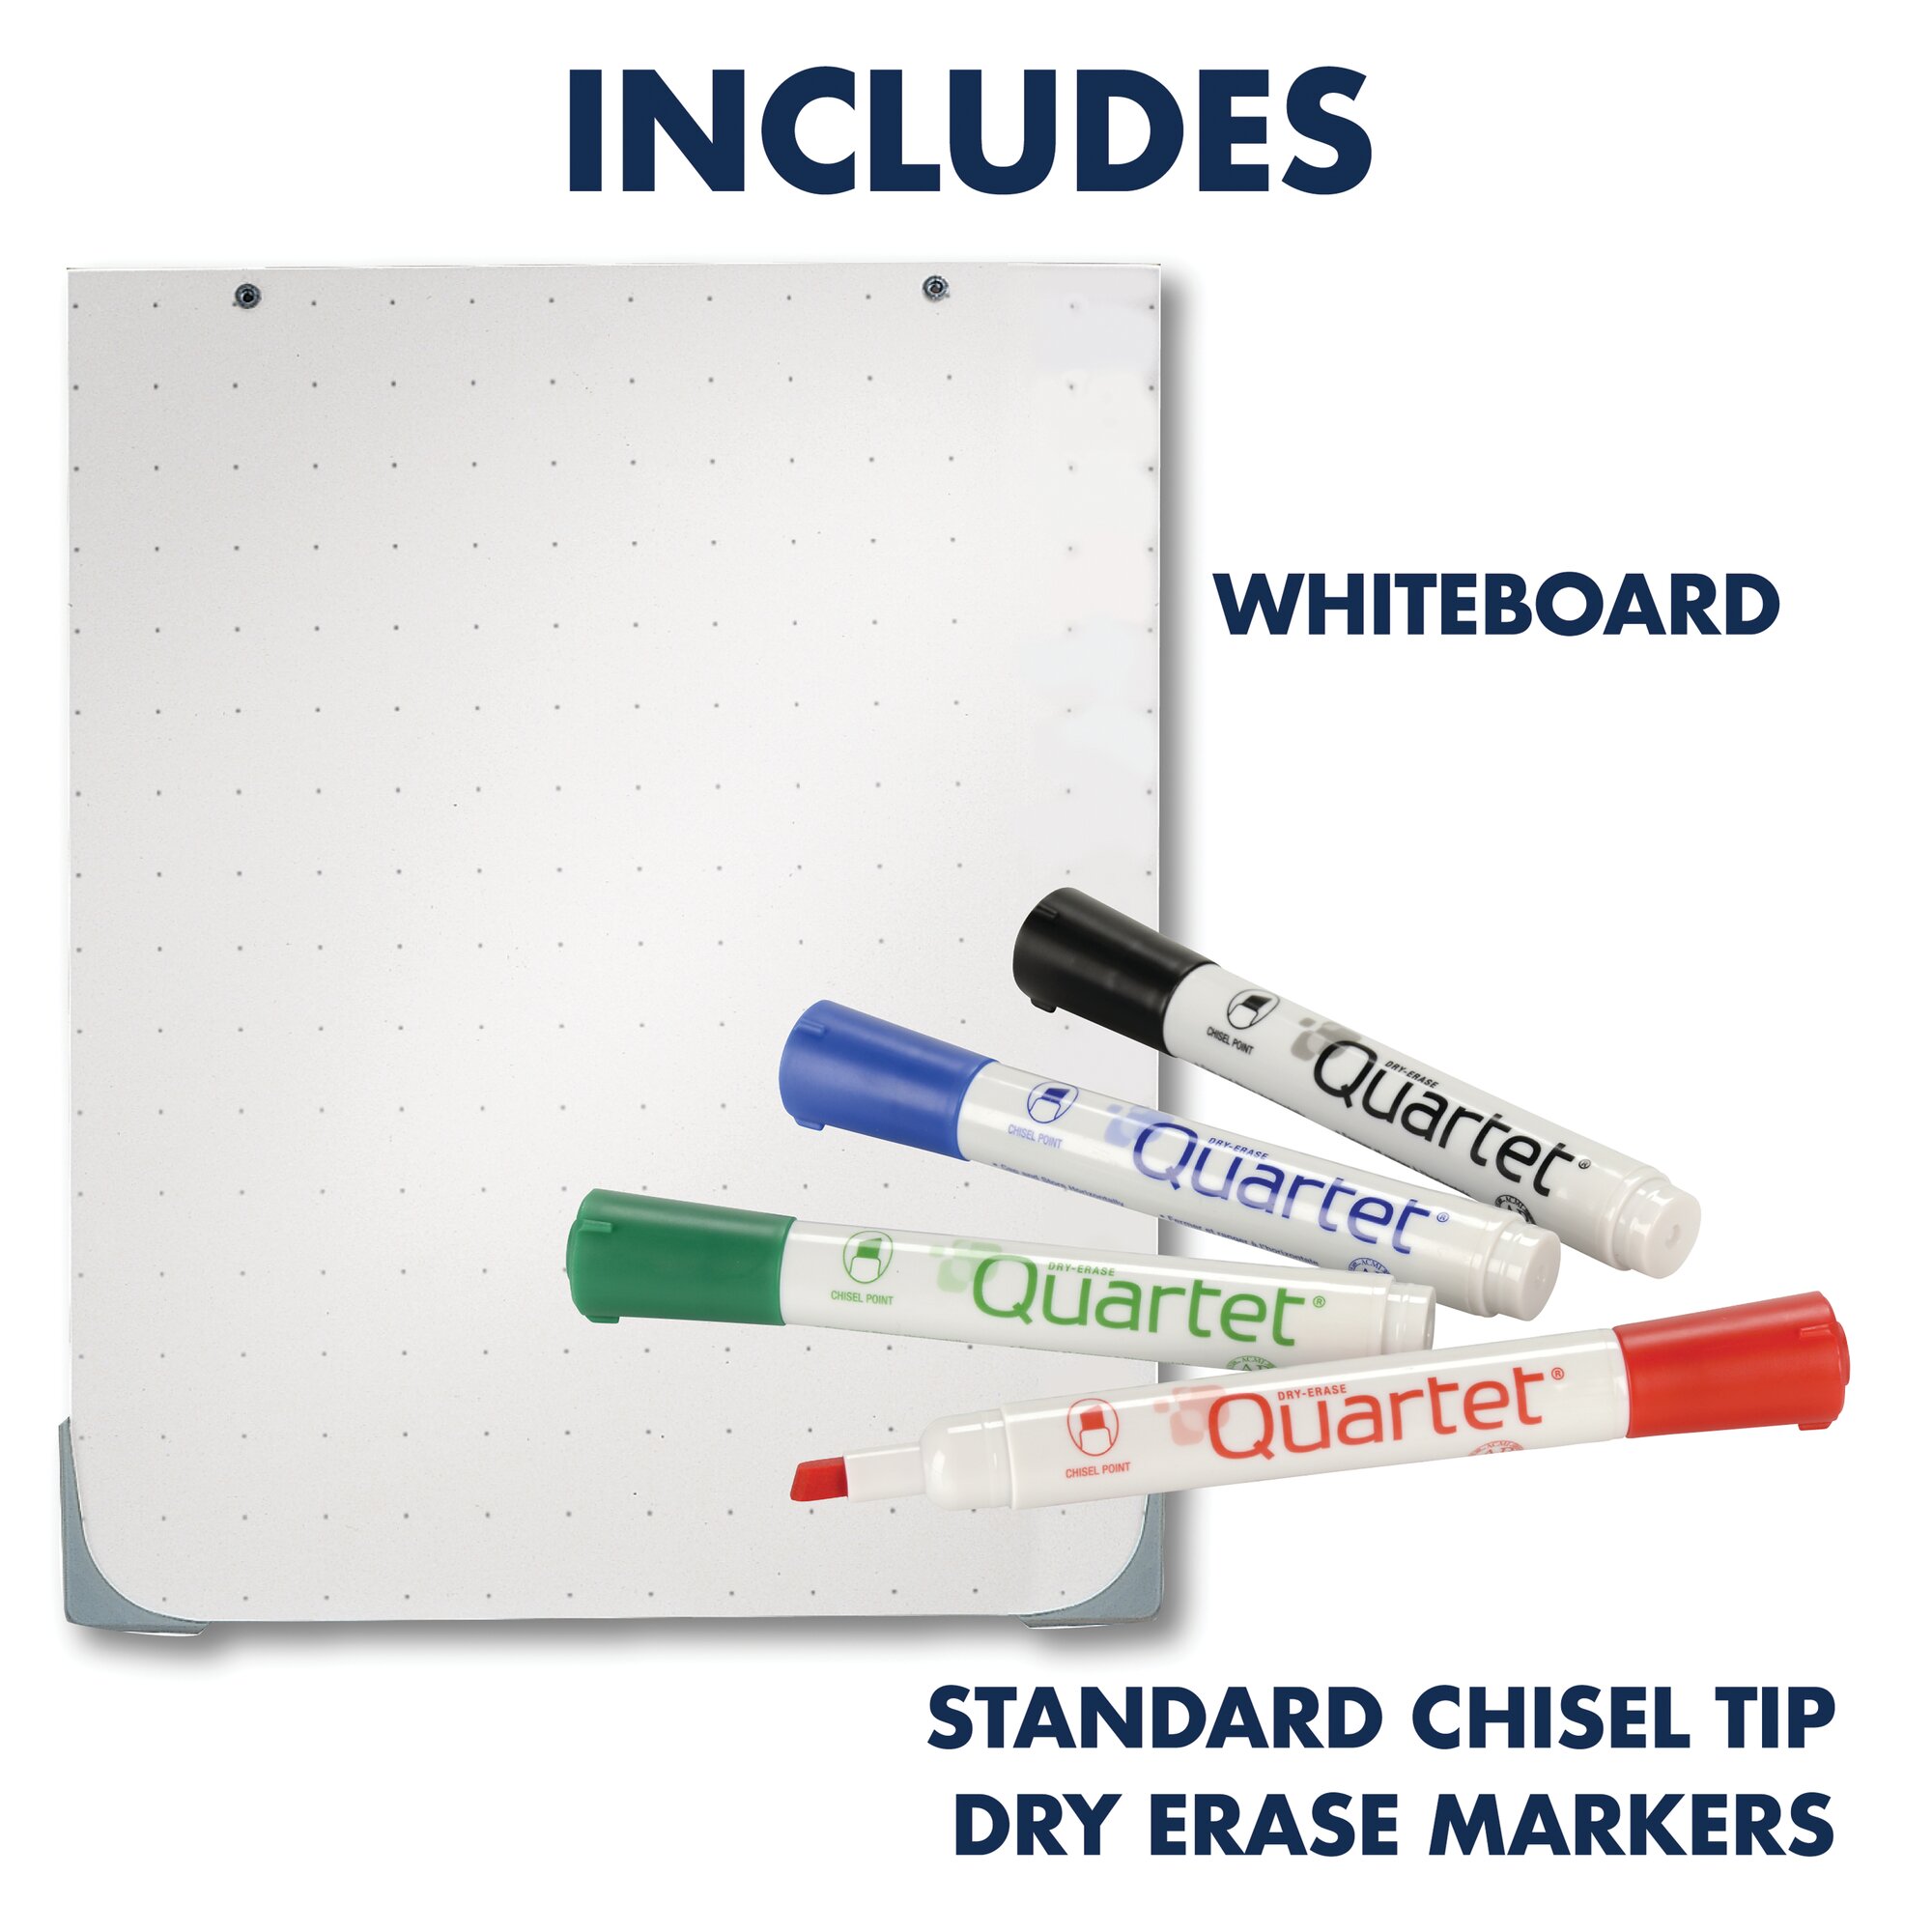 Quartet DuraMax Total Erase Whiteboard Accessory, For Easels, 27" x 34" - image 4 of 5